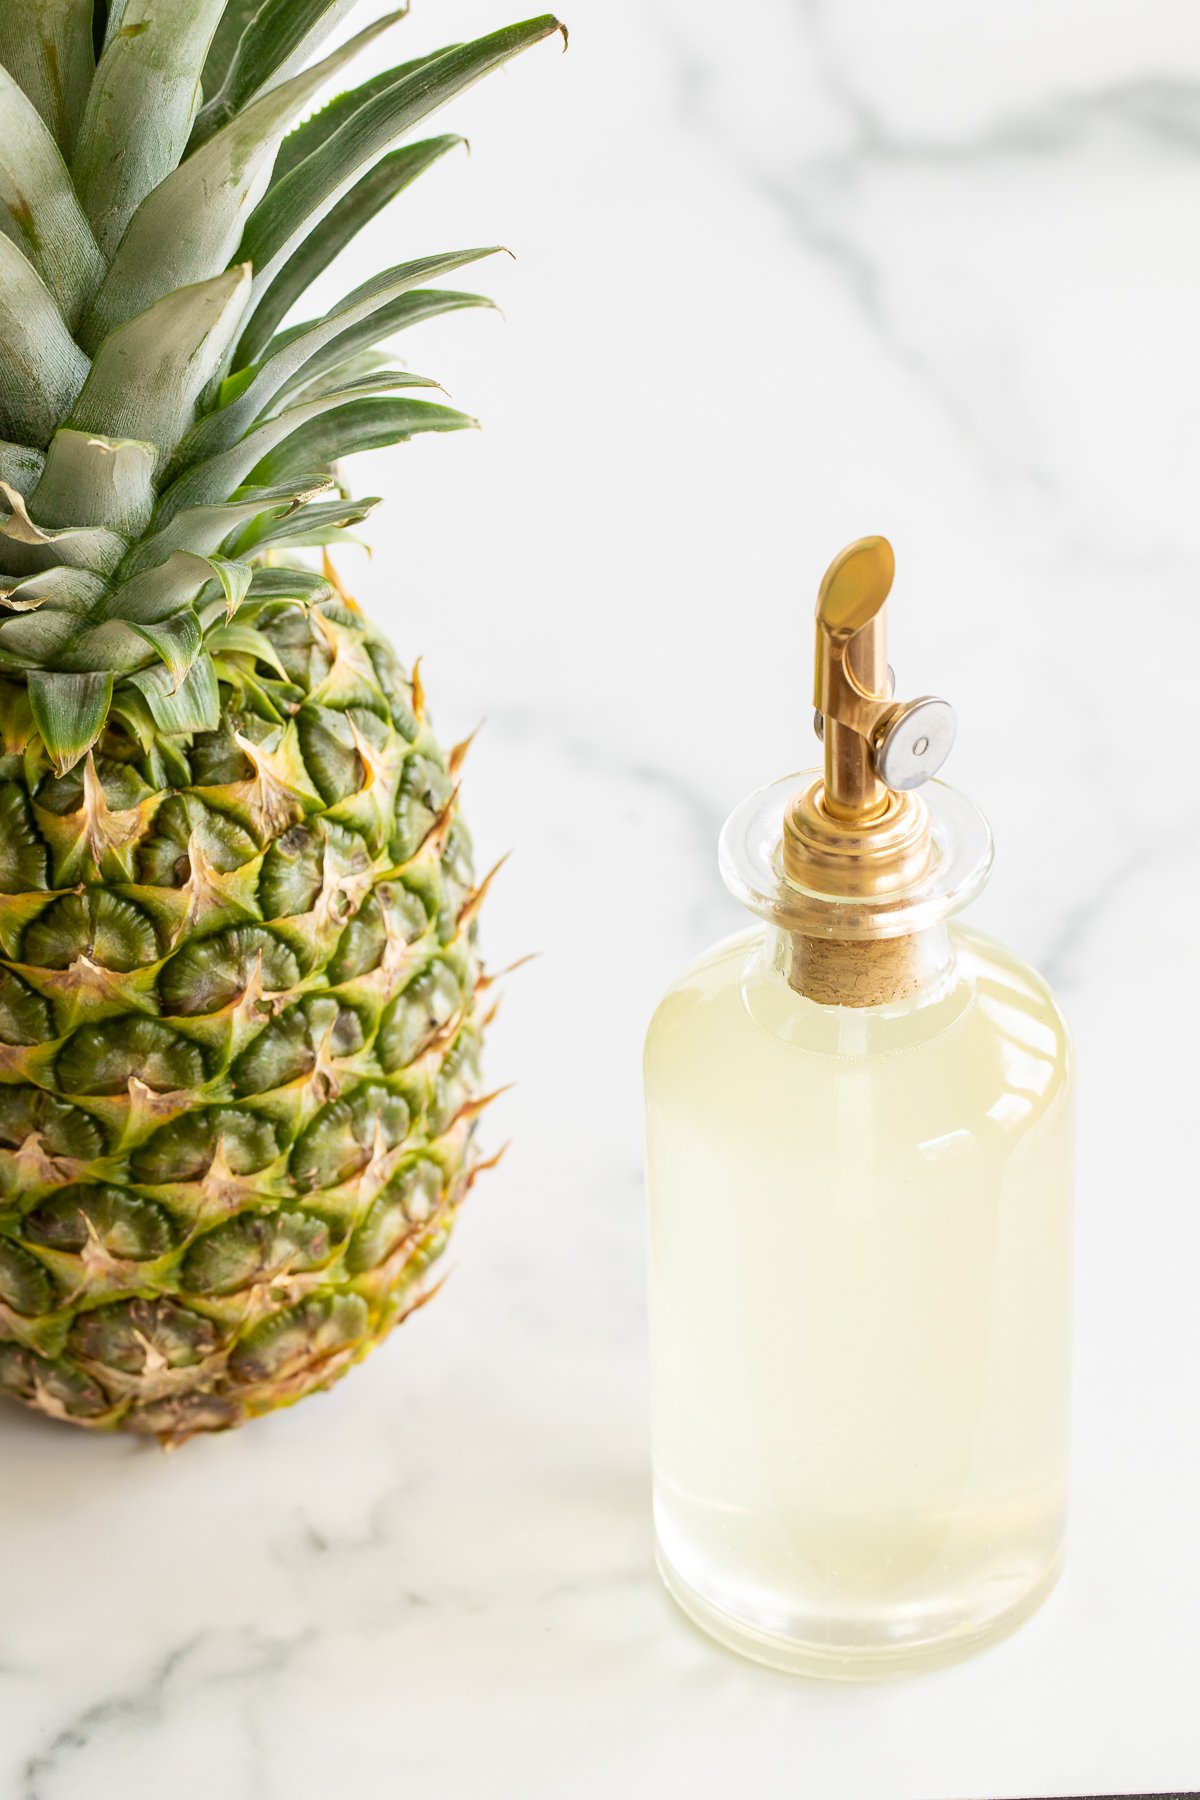 Bottle of pineapple simple syrup set next to fresh pineapple